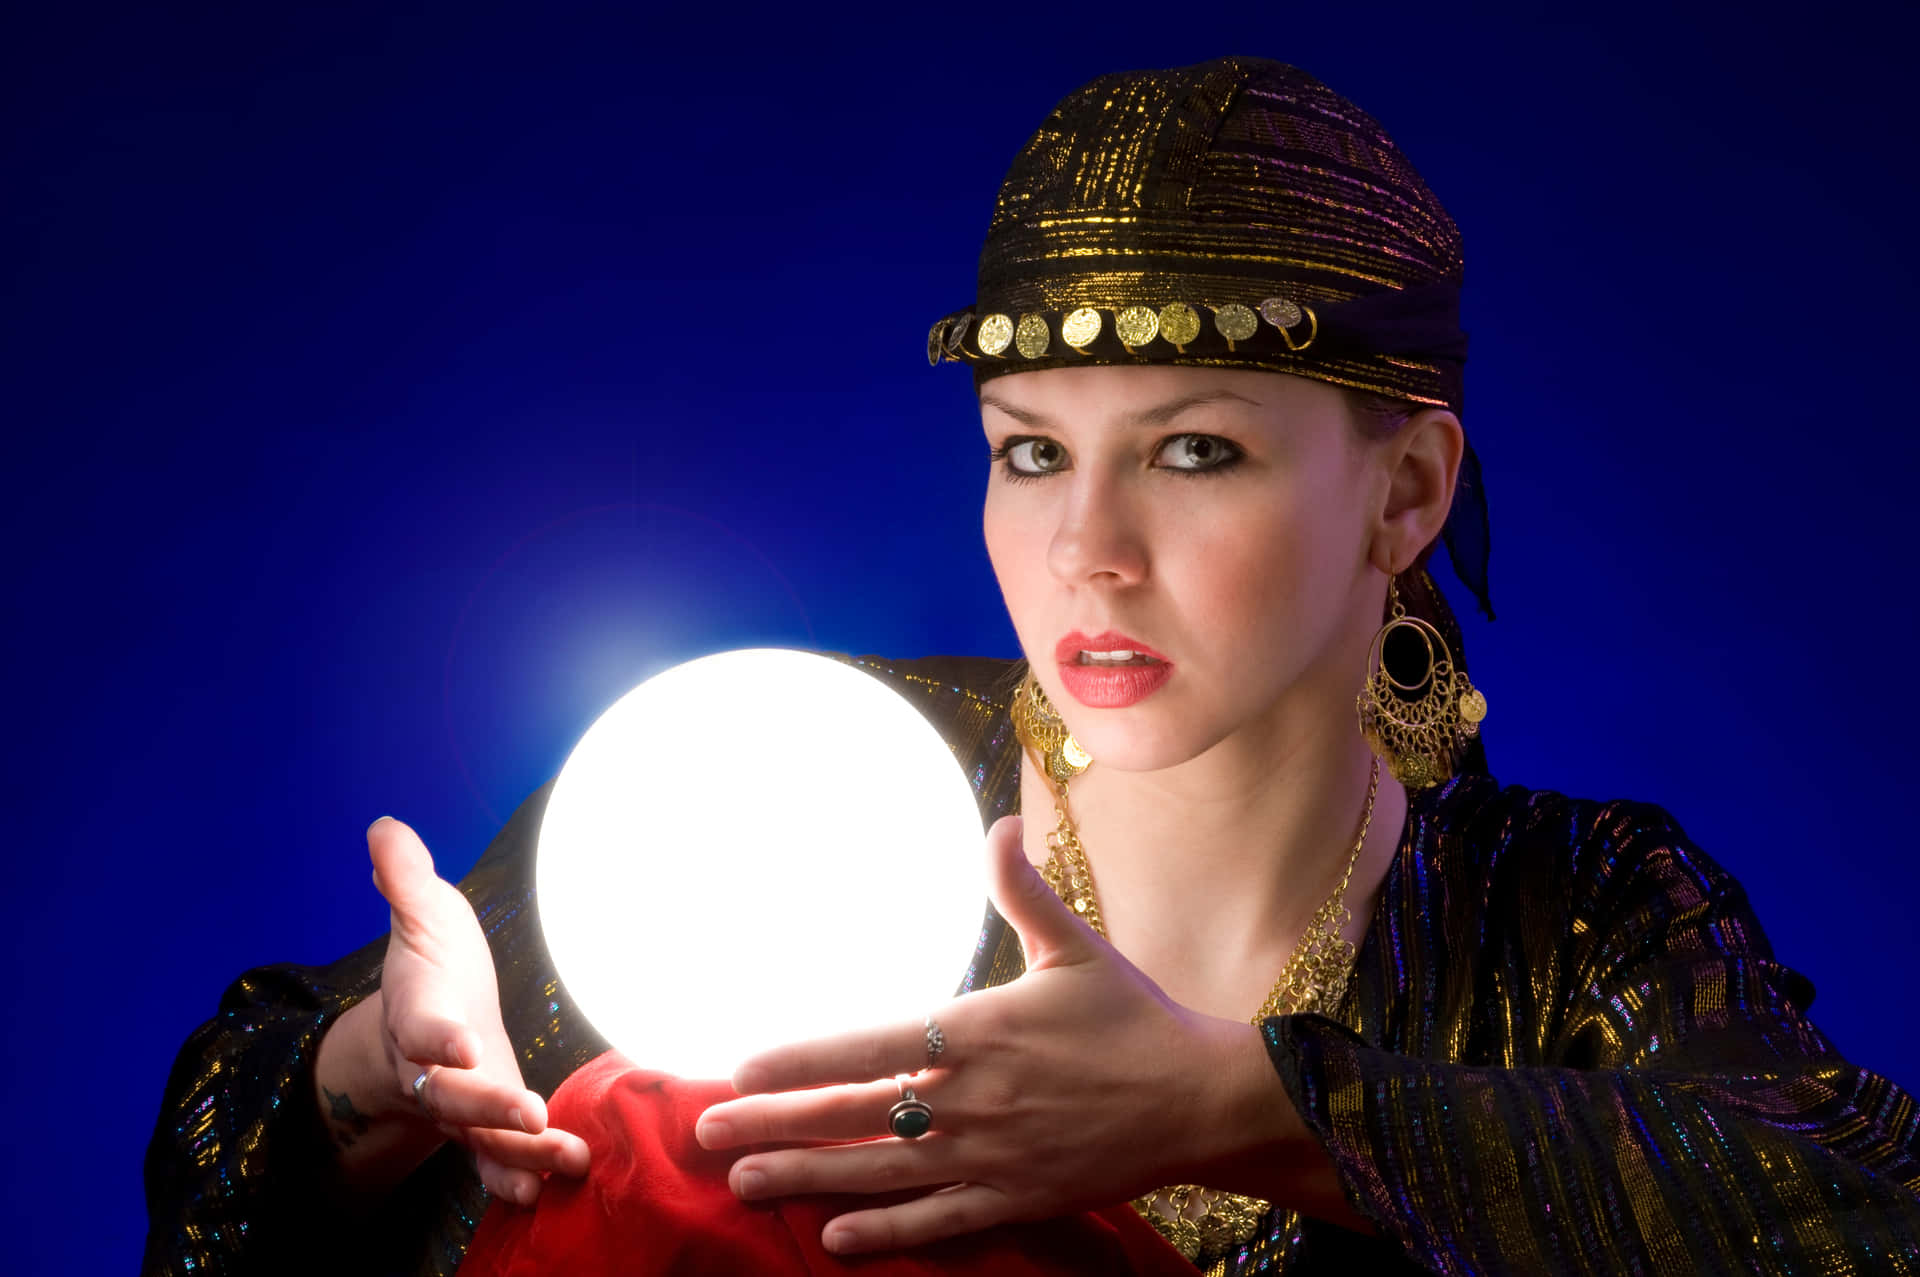 Mysterious Fortune Teller with Crystal Ball Wallpaper